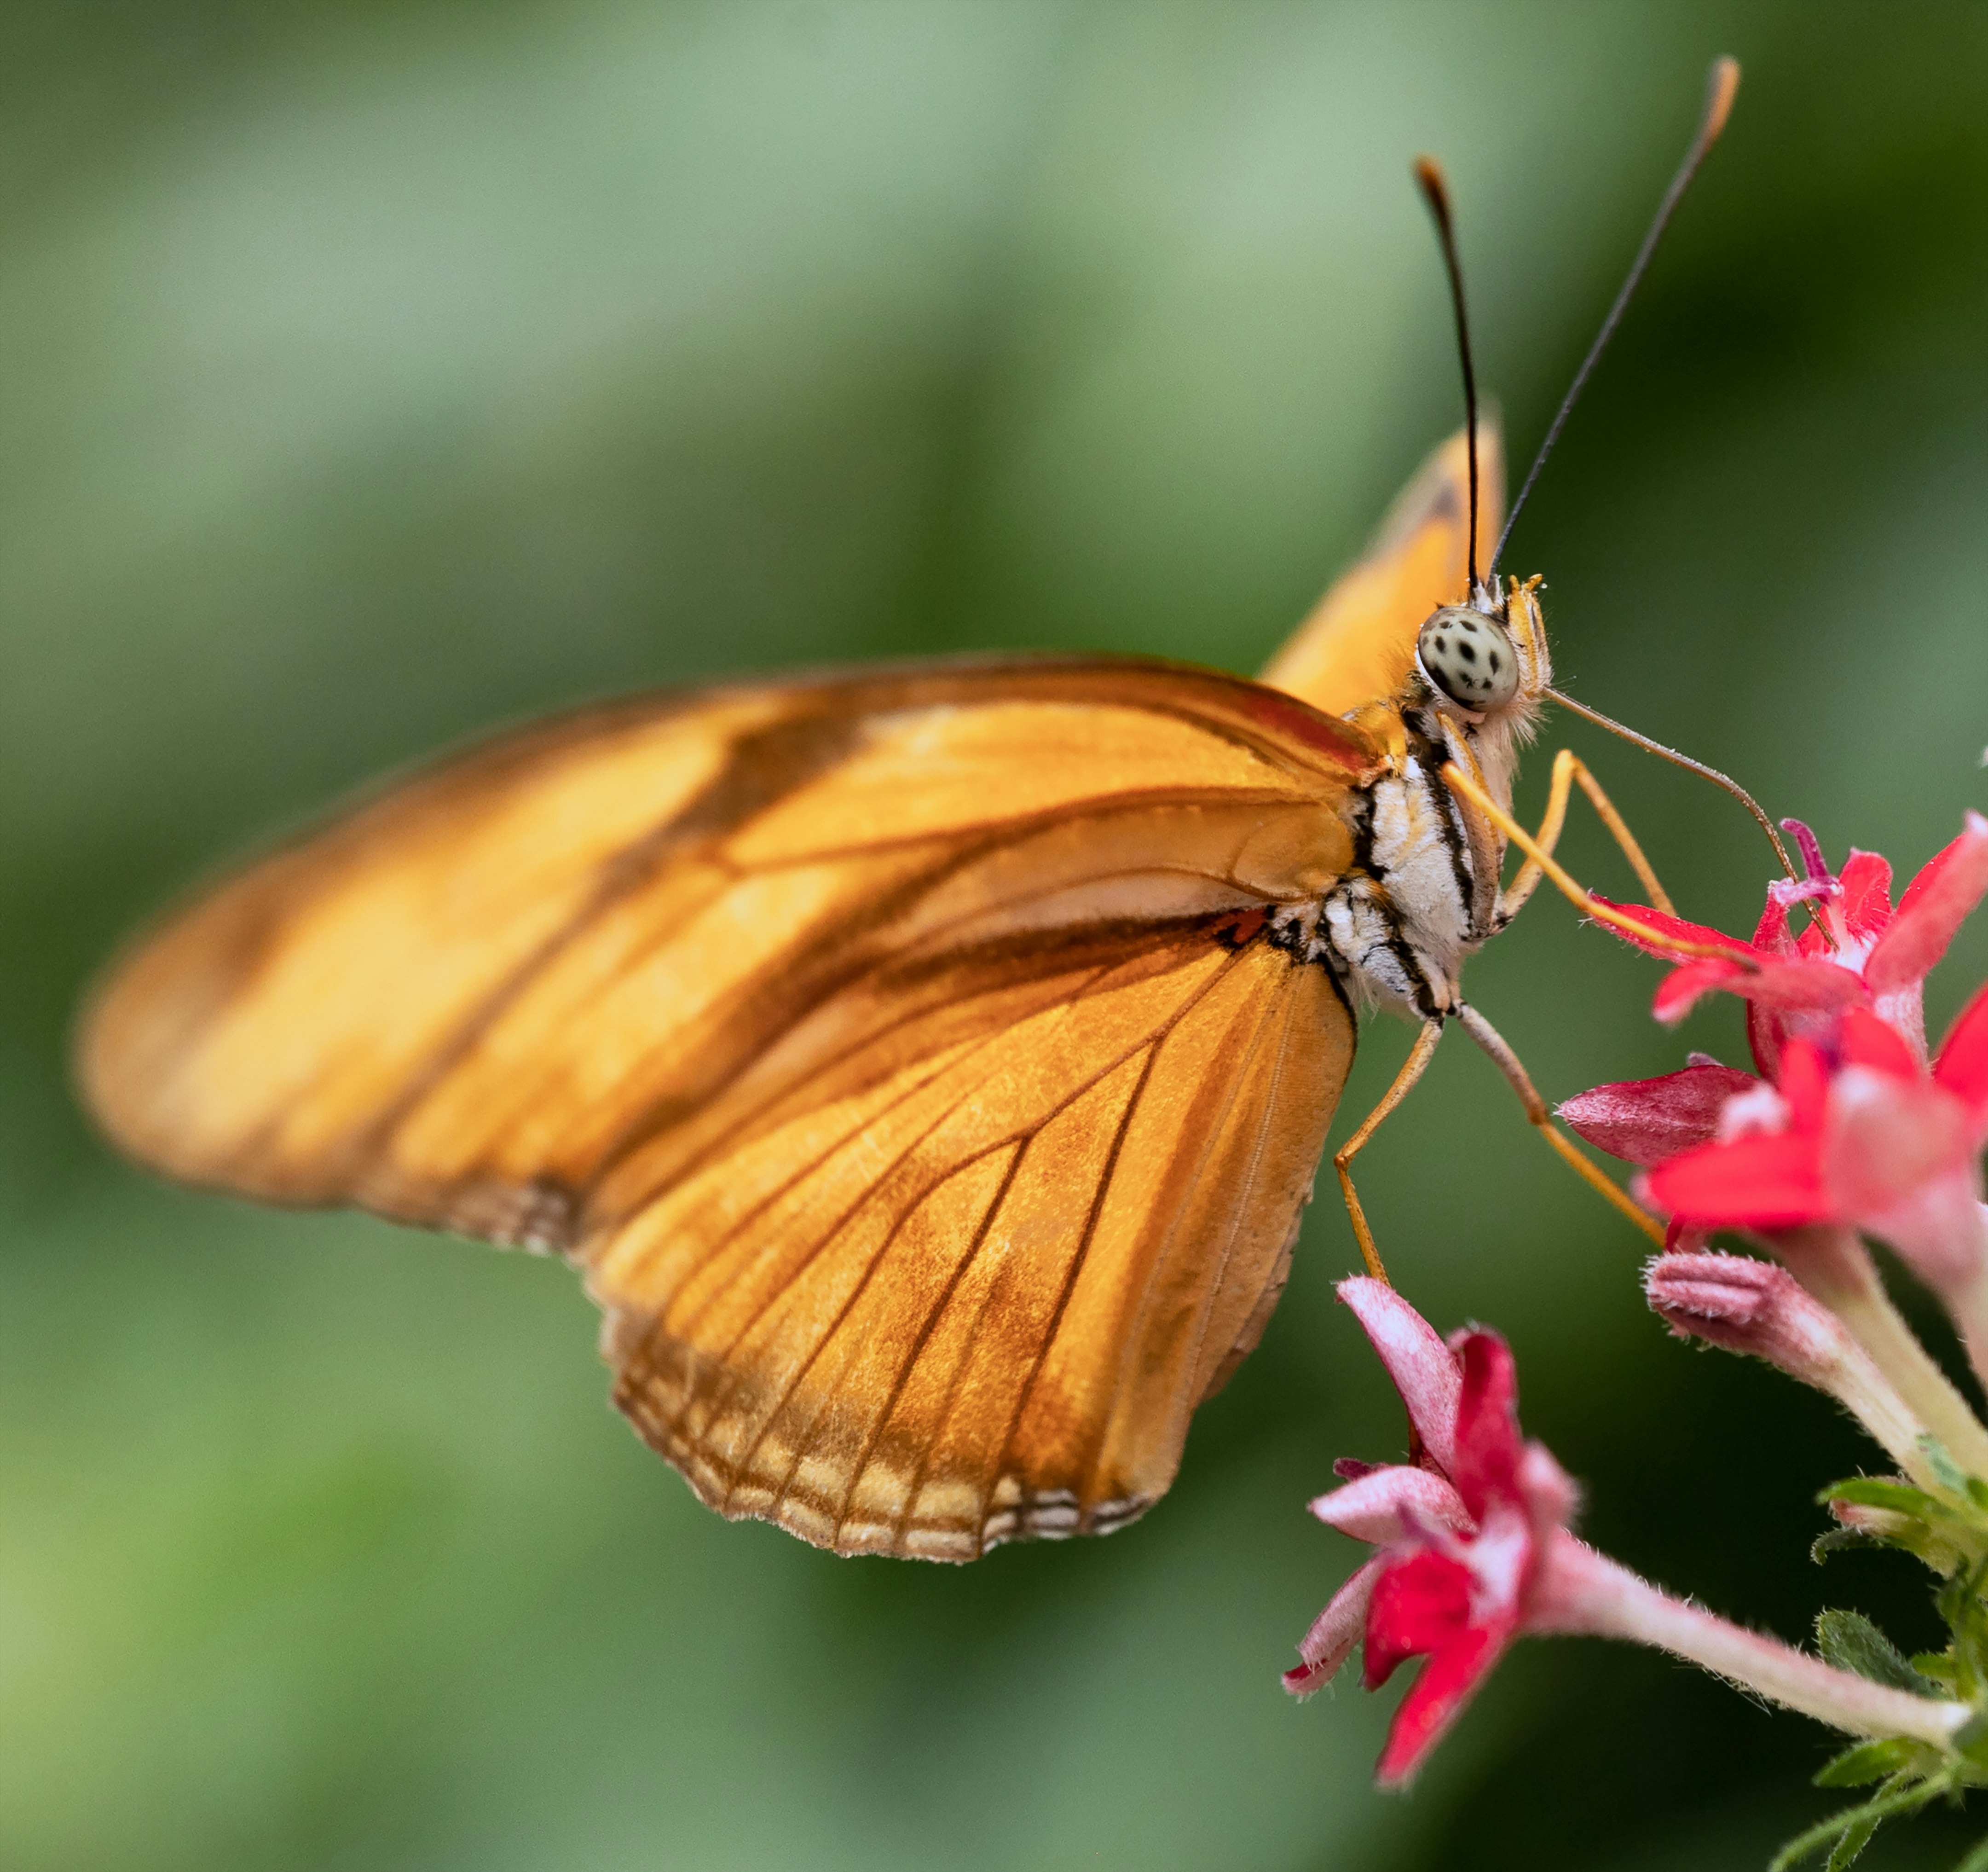 brown and black butterfly perched on pink flower in close up photography during daytime